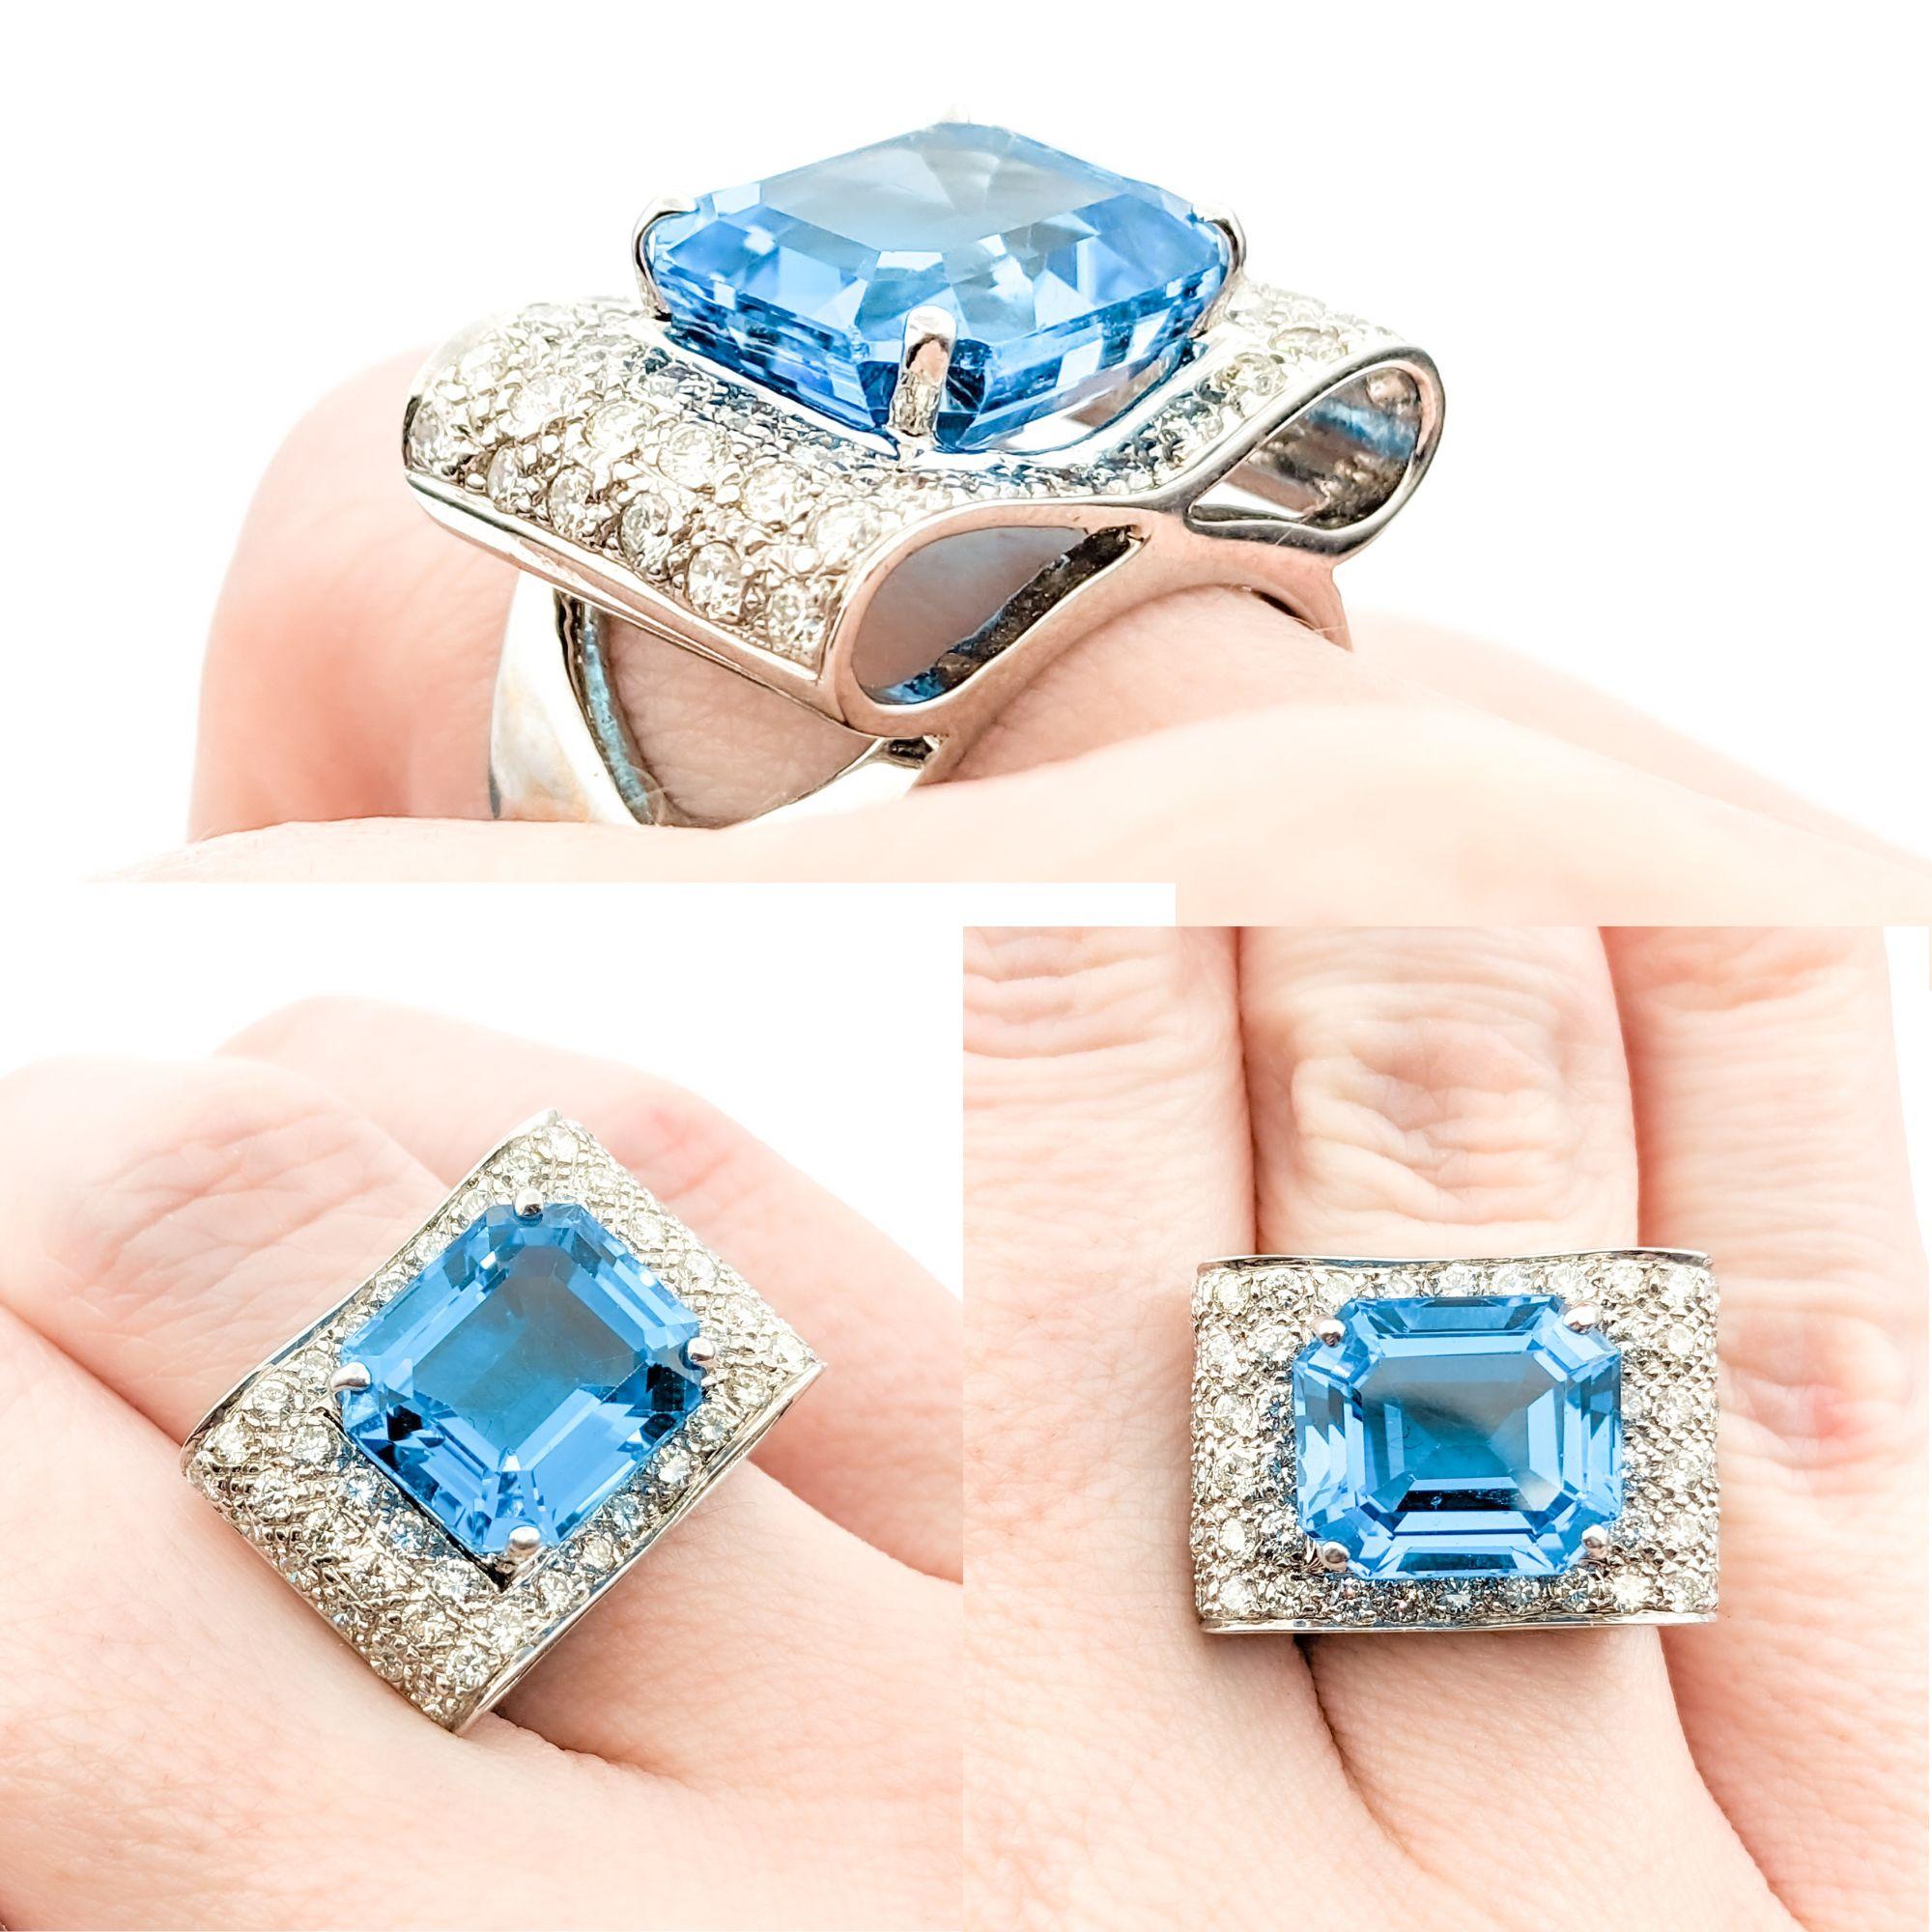 Vibrant Blue Topaz & Diamond Statement Ring

Crafted from 14kt white gold, this stunning ring features a prominent 12.50 x 11mm emerald-cut Swiss blue topaz, elegantly framed by .50ctw of round brilliant-cut diamonds. The diamonds, known for their